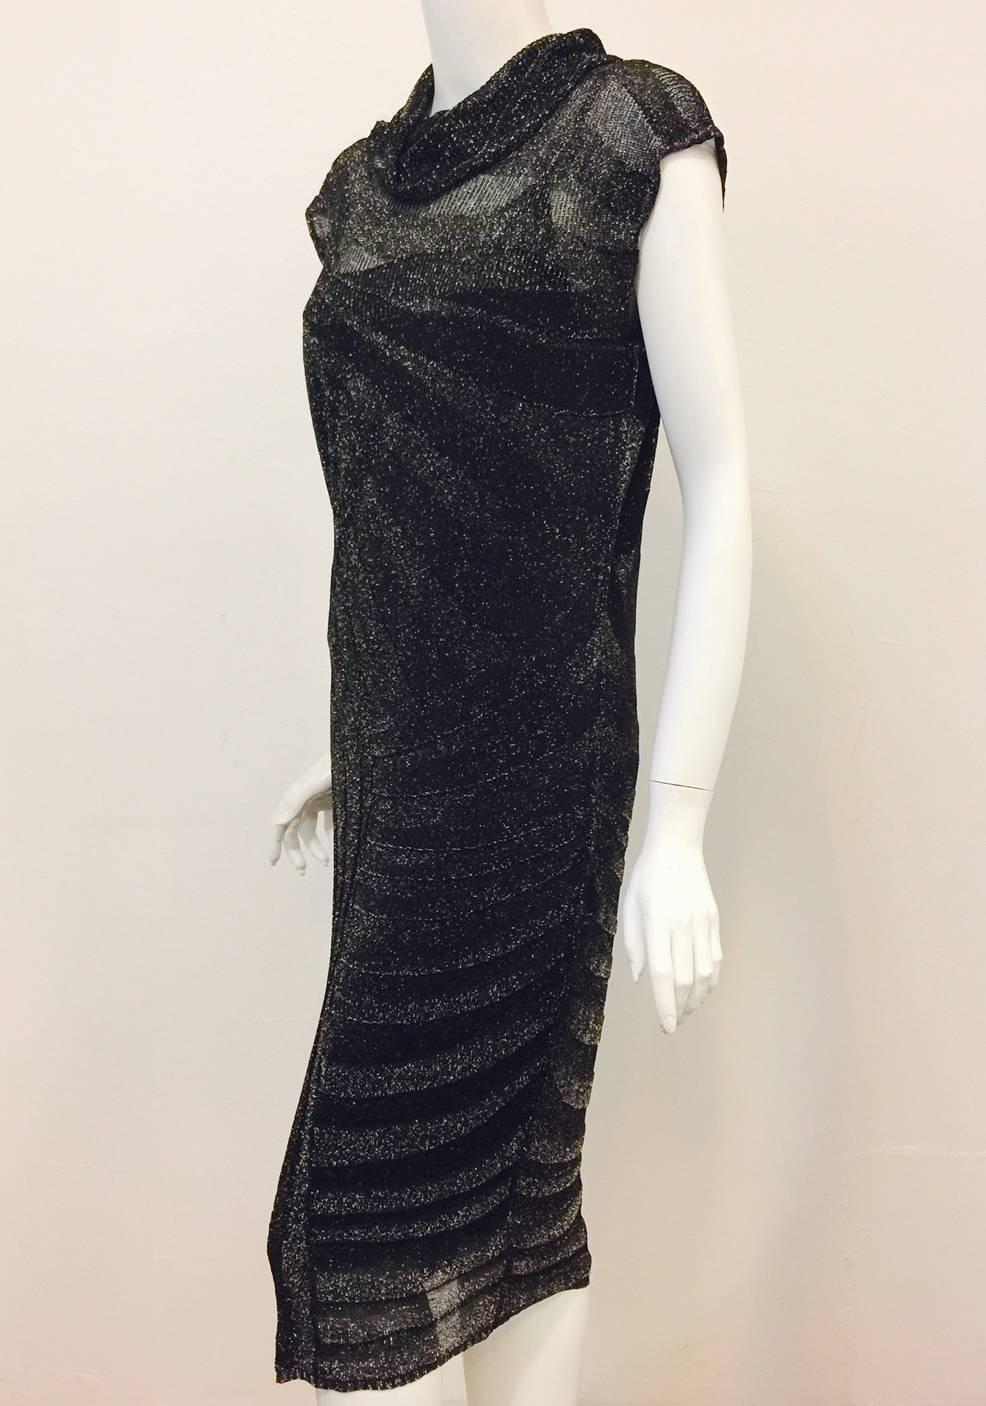 New Escada Black Knit Cap Sleeve Dress is lightweight and substantial at the same time!  Features body conscious, below-the-knee  silhouette, complex, asymmetric knit pattern from neck to hem, and cap sleeves.  Black with just the right amount of